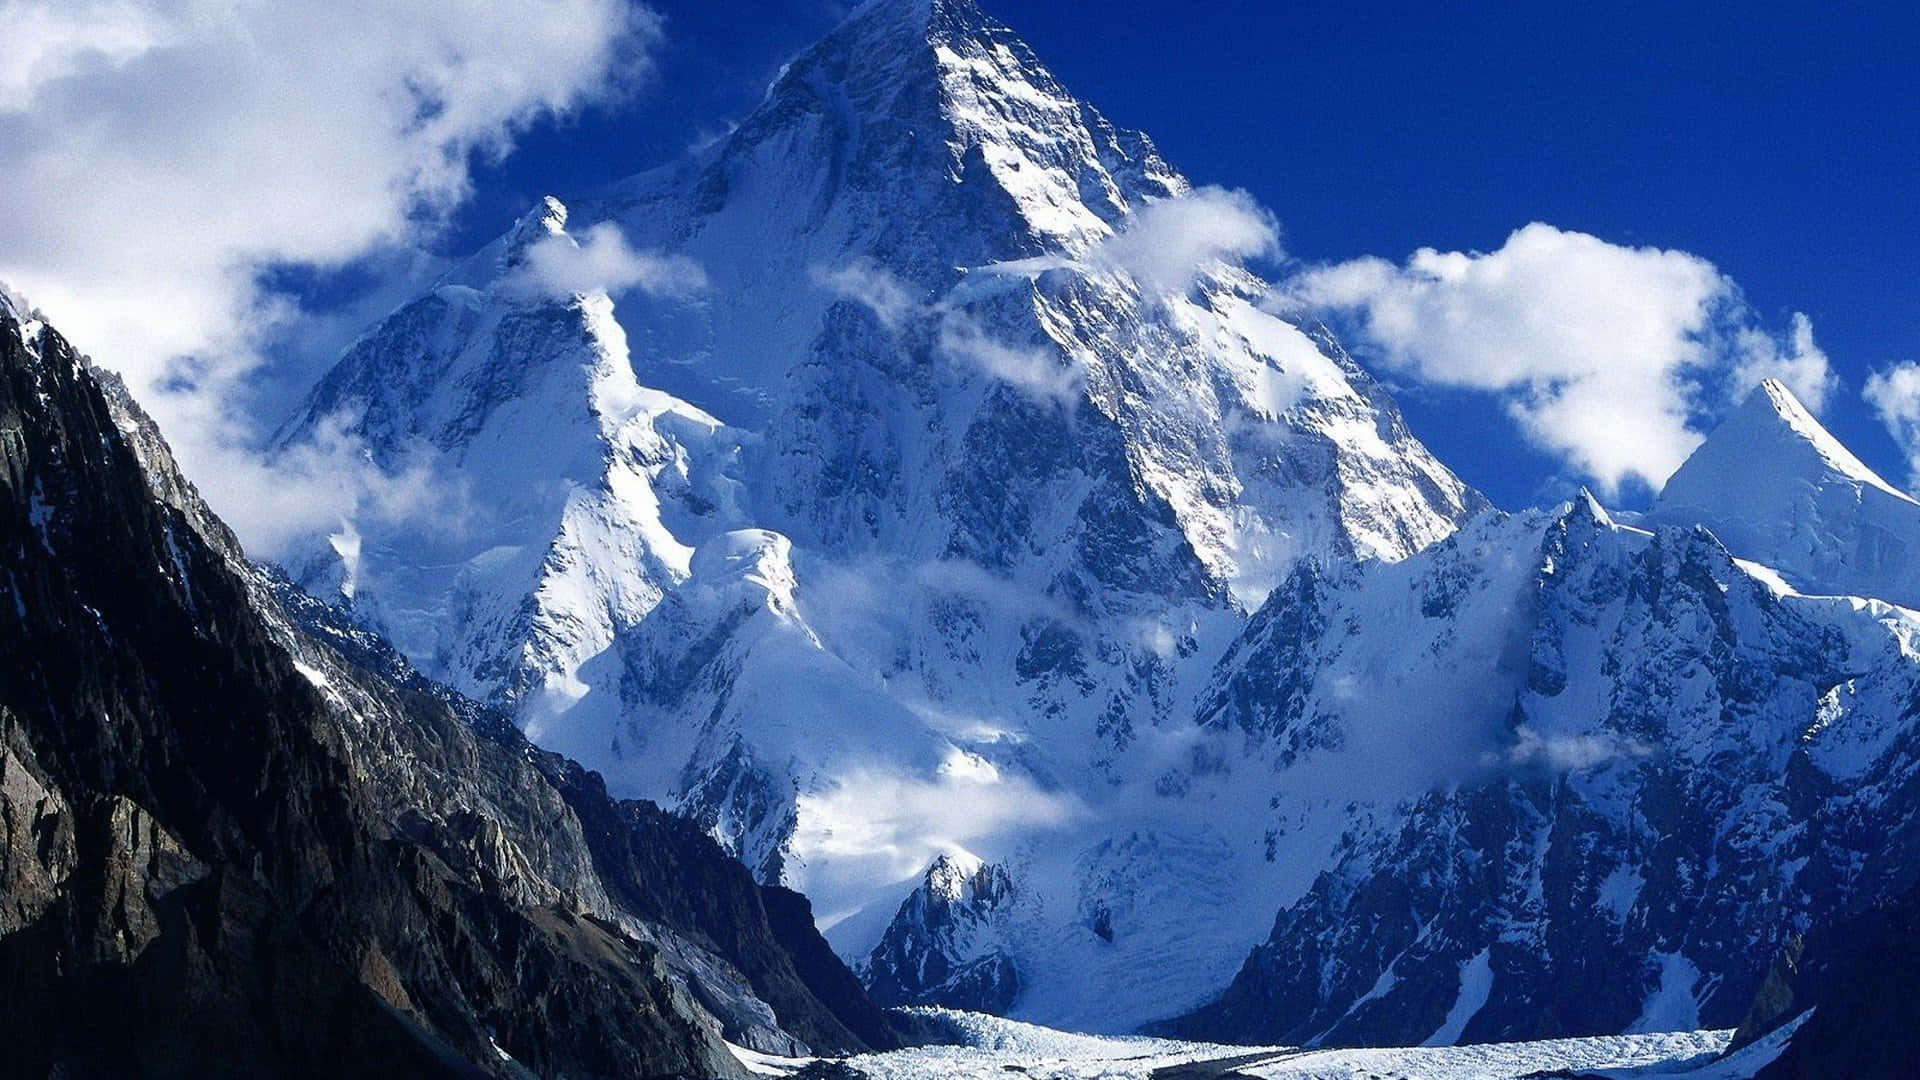 Magnificent View of Snowy Mountain Peaks